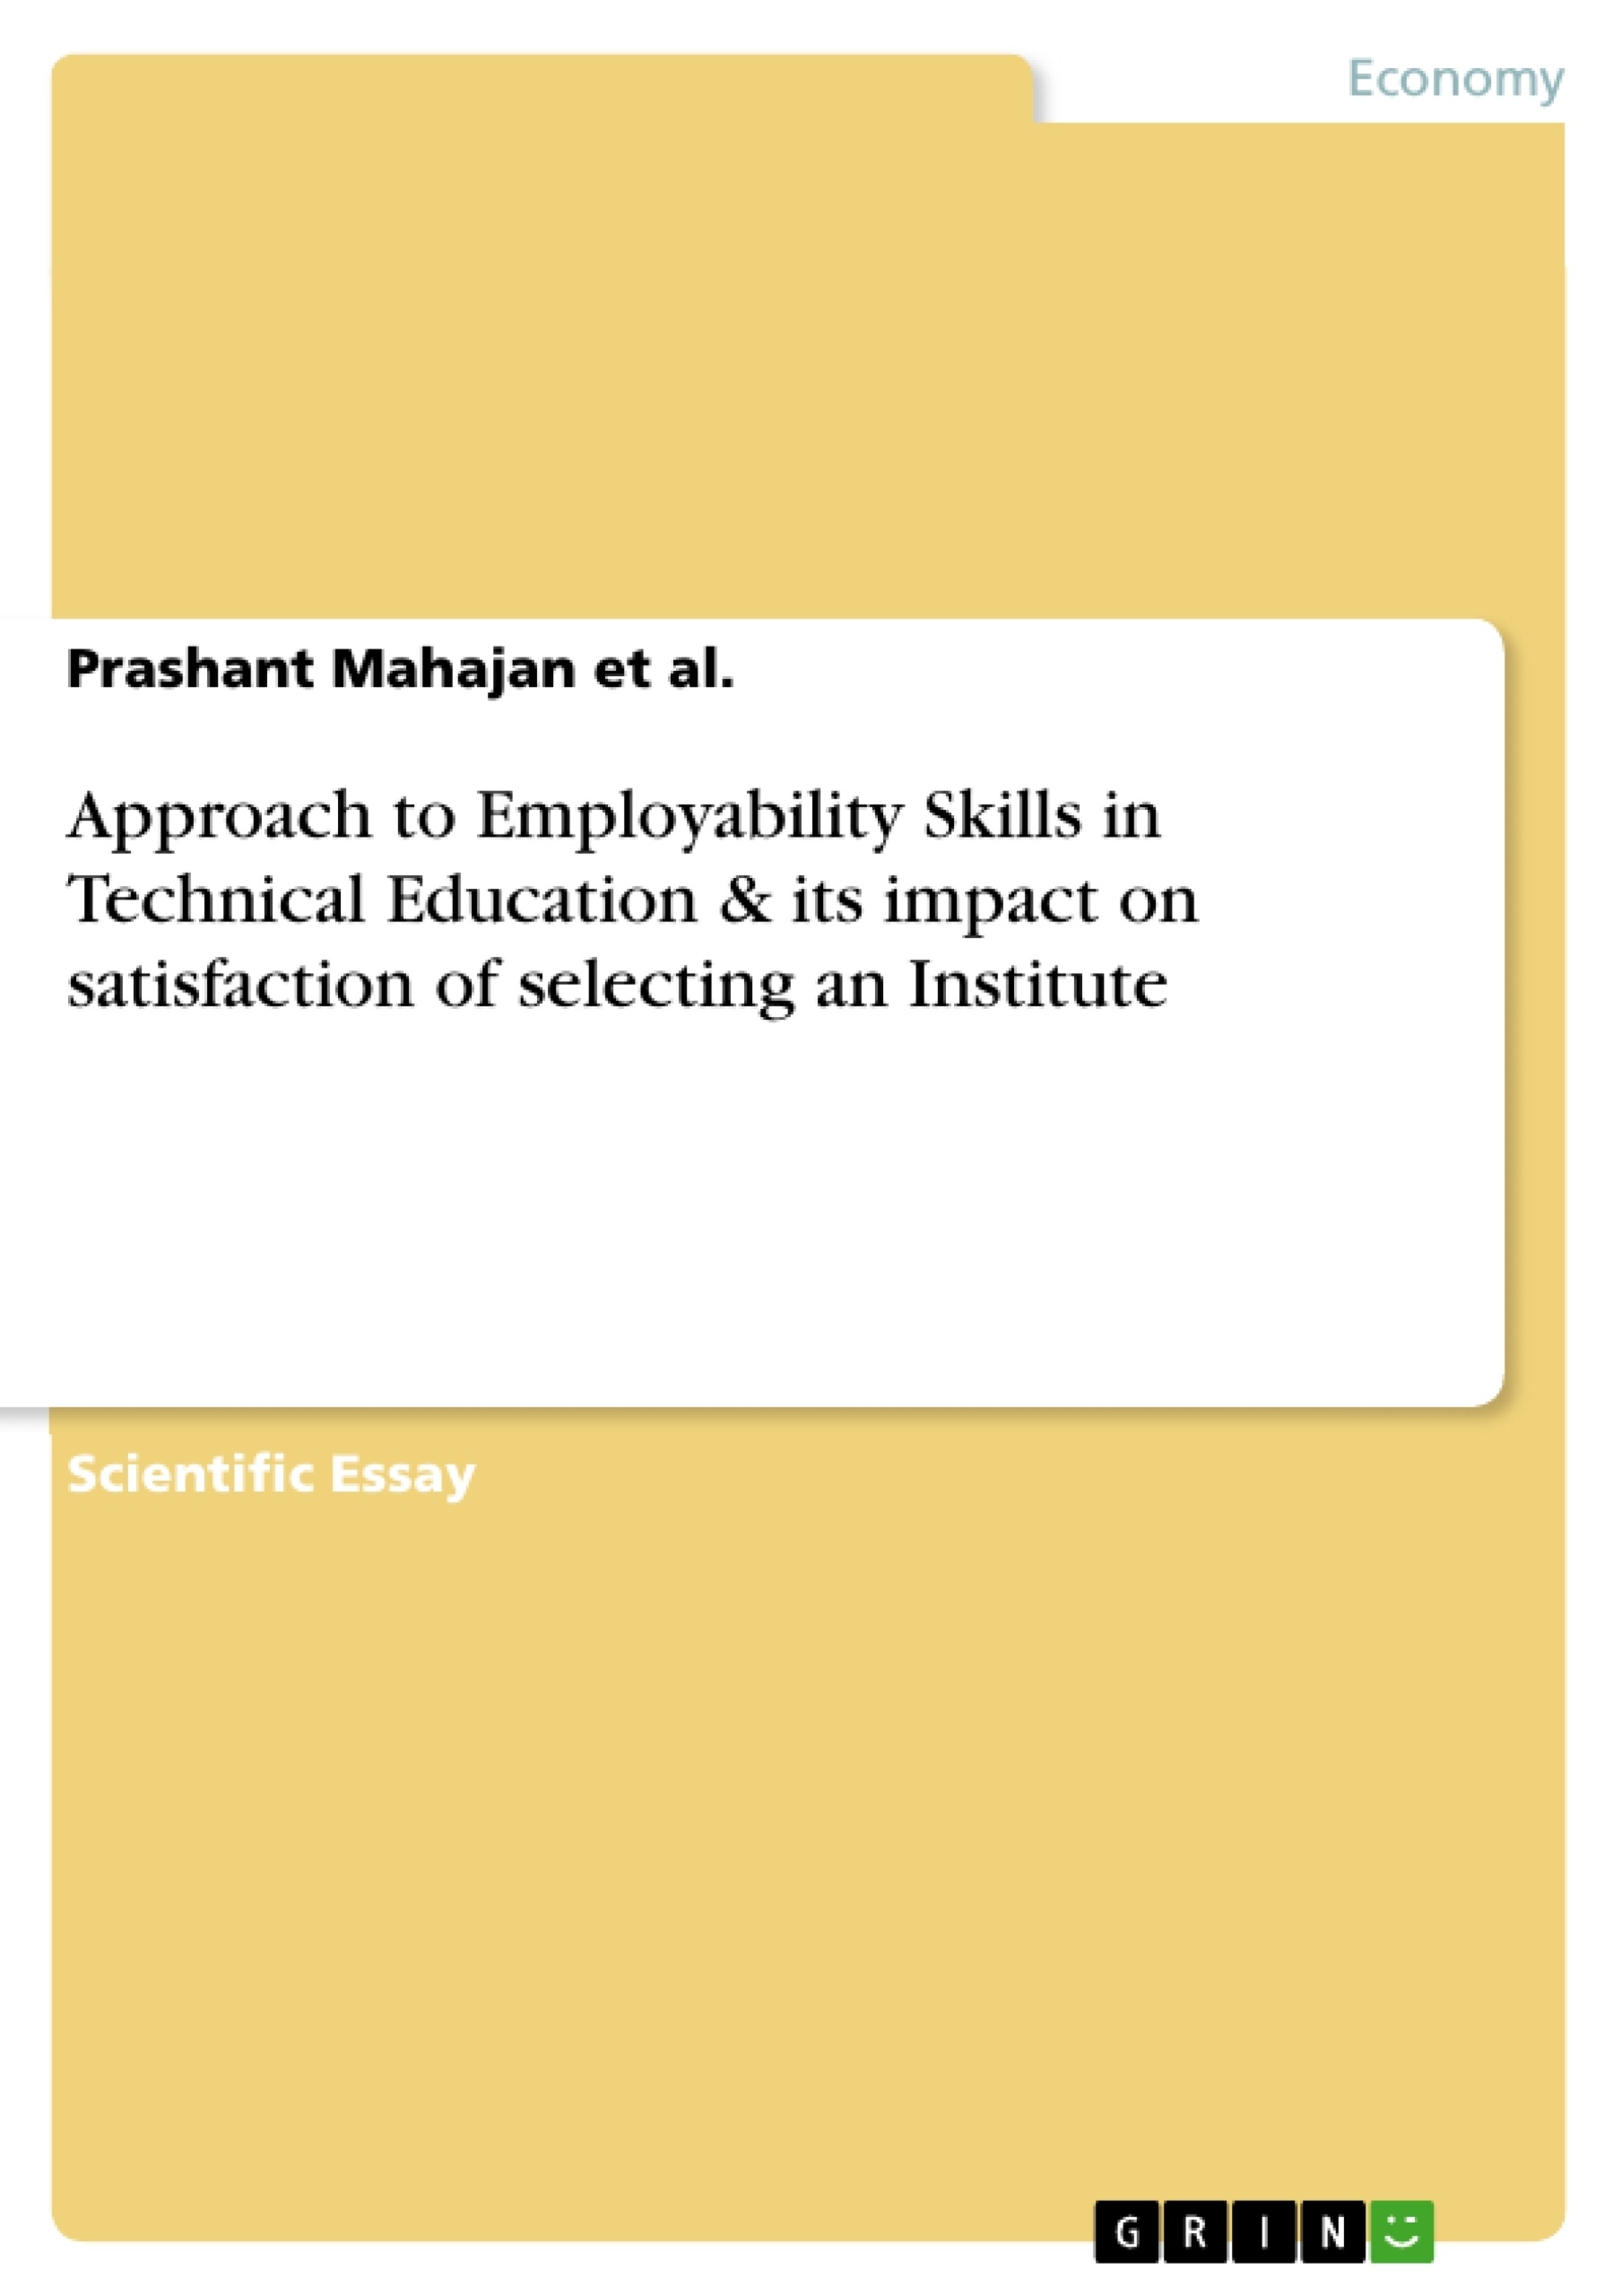 Title: Approach to Employability Skills in Technical Education & its impact on satisfaction of selecting an Institute